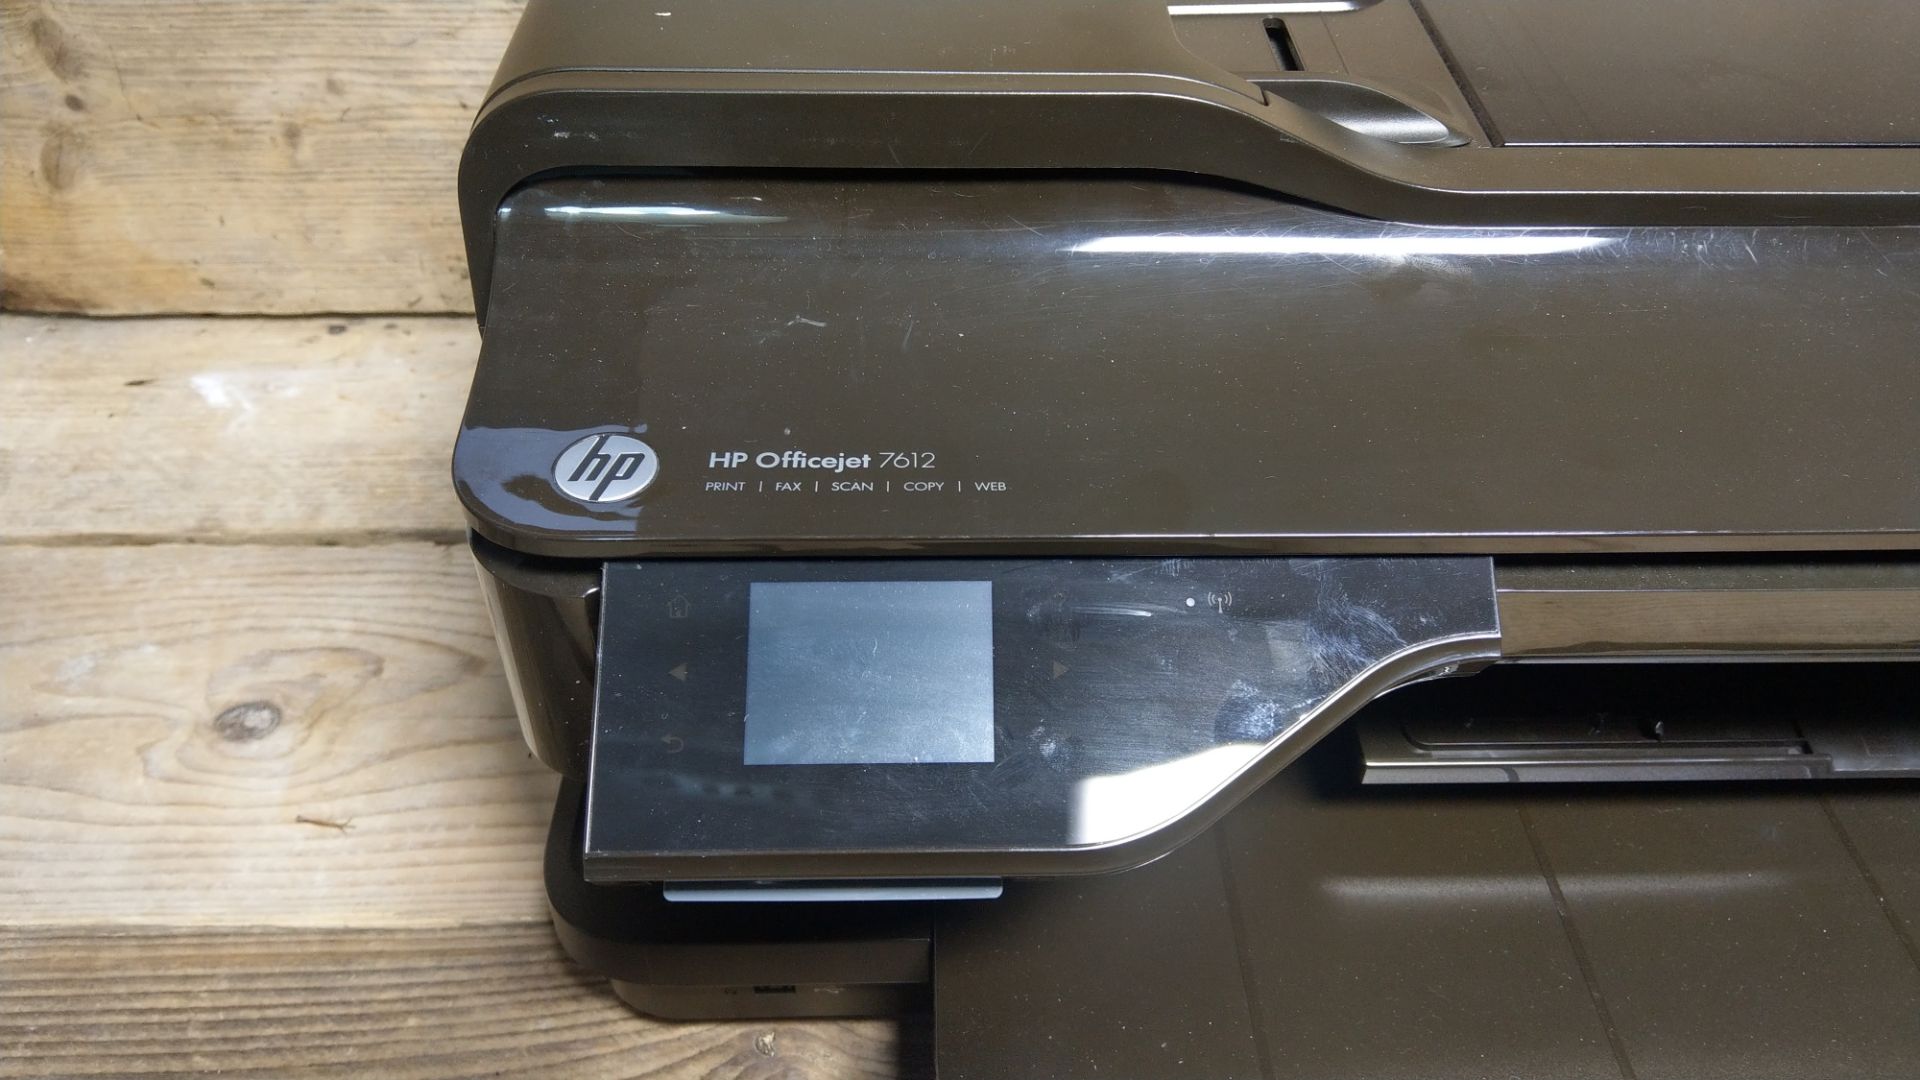 HP Officejet A3 7612 - Print, Fax, Scan & Copy Web with spare cartridges. - Image 2 of 4